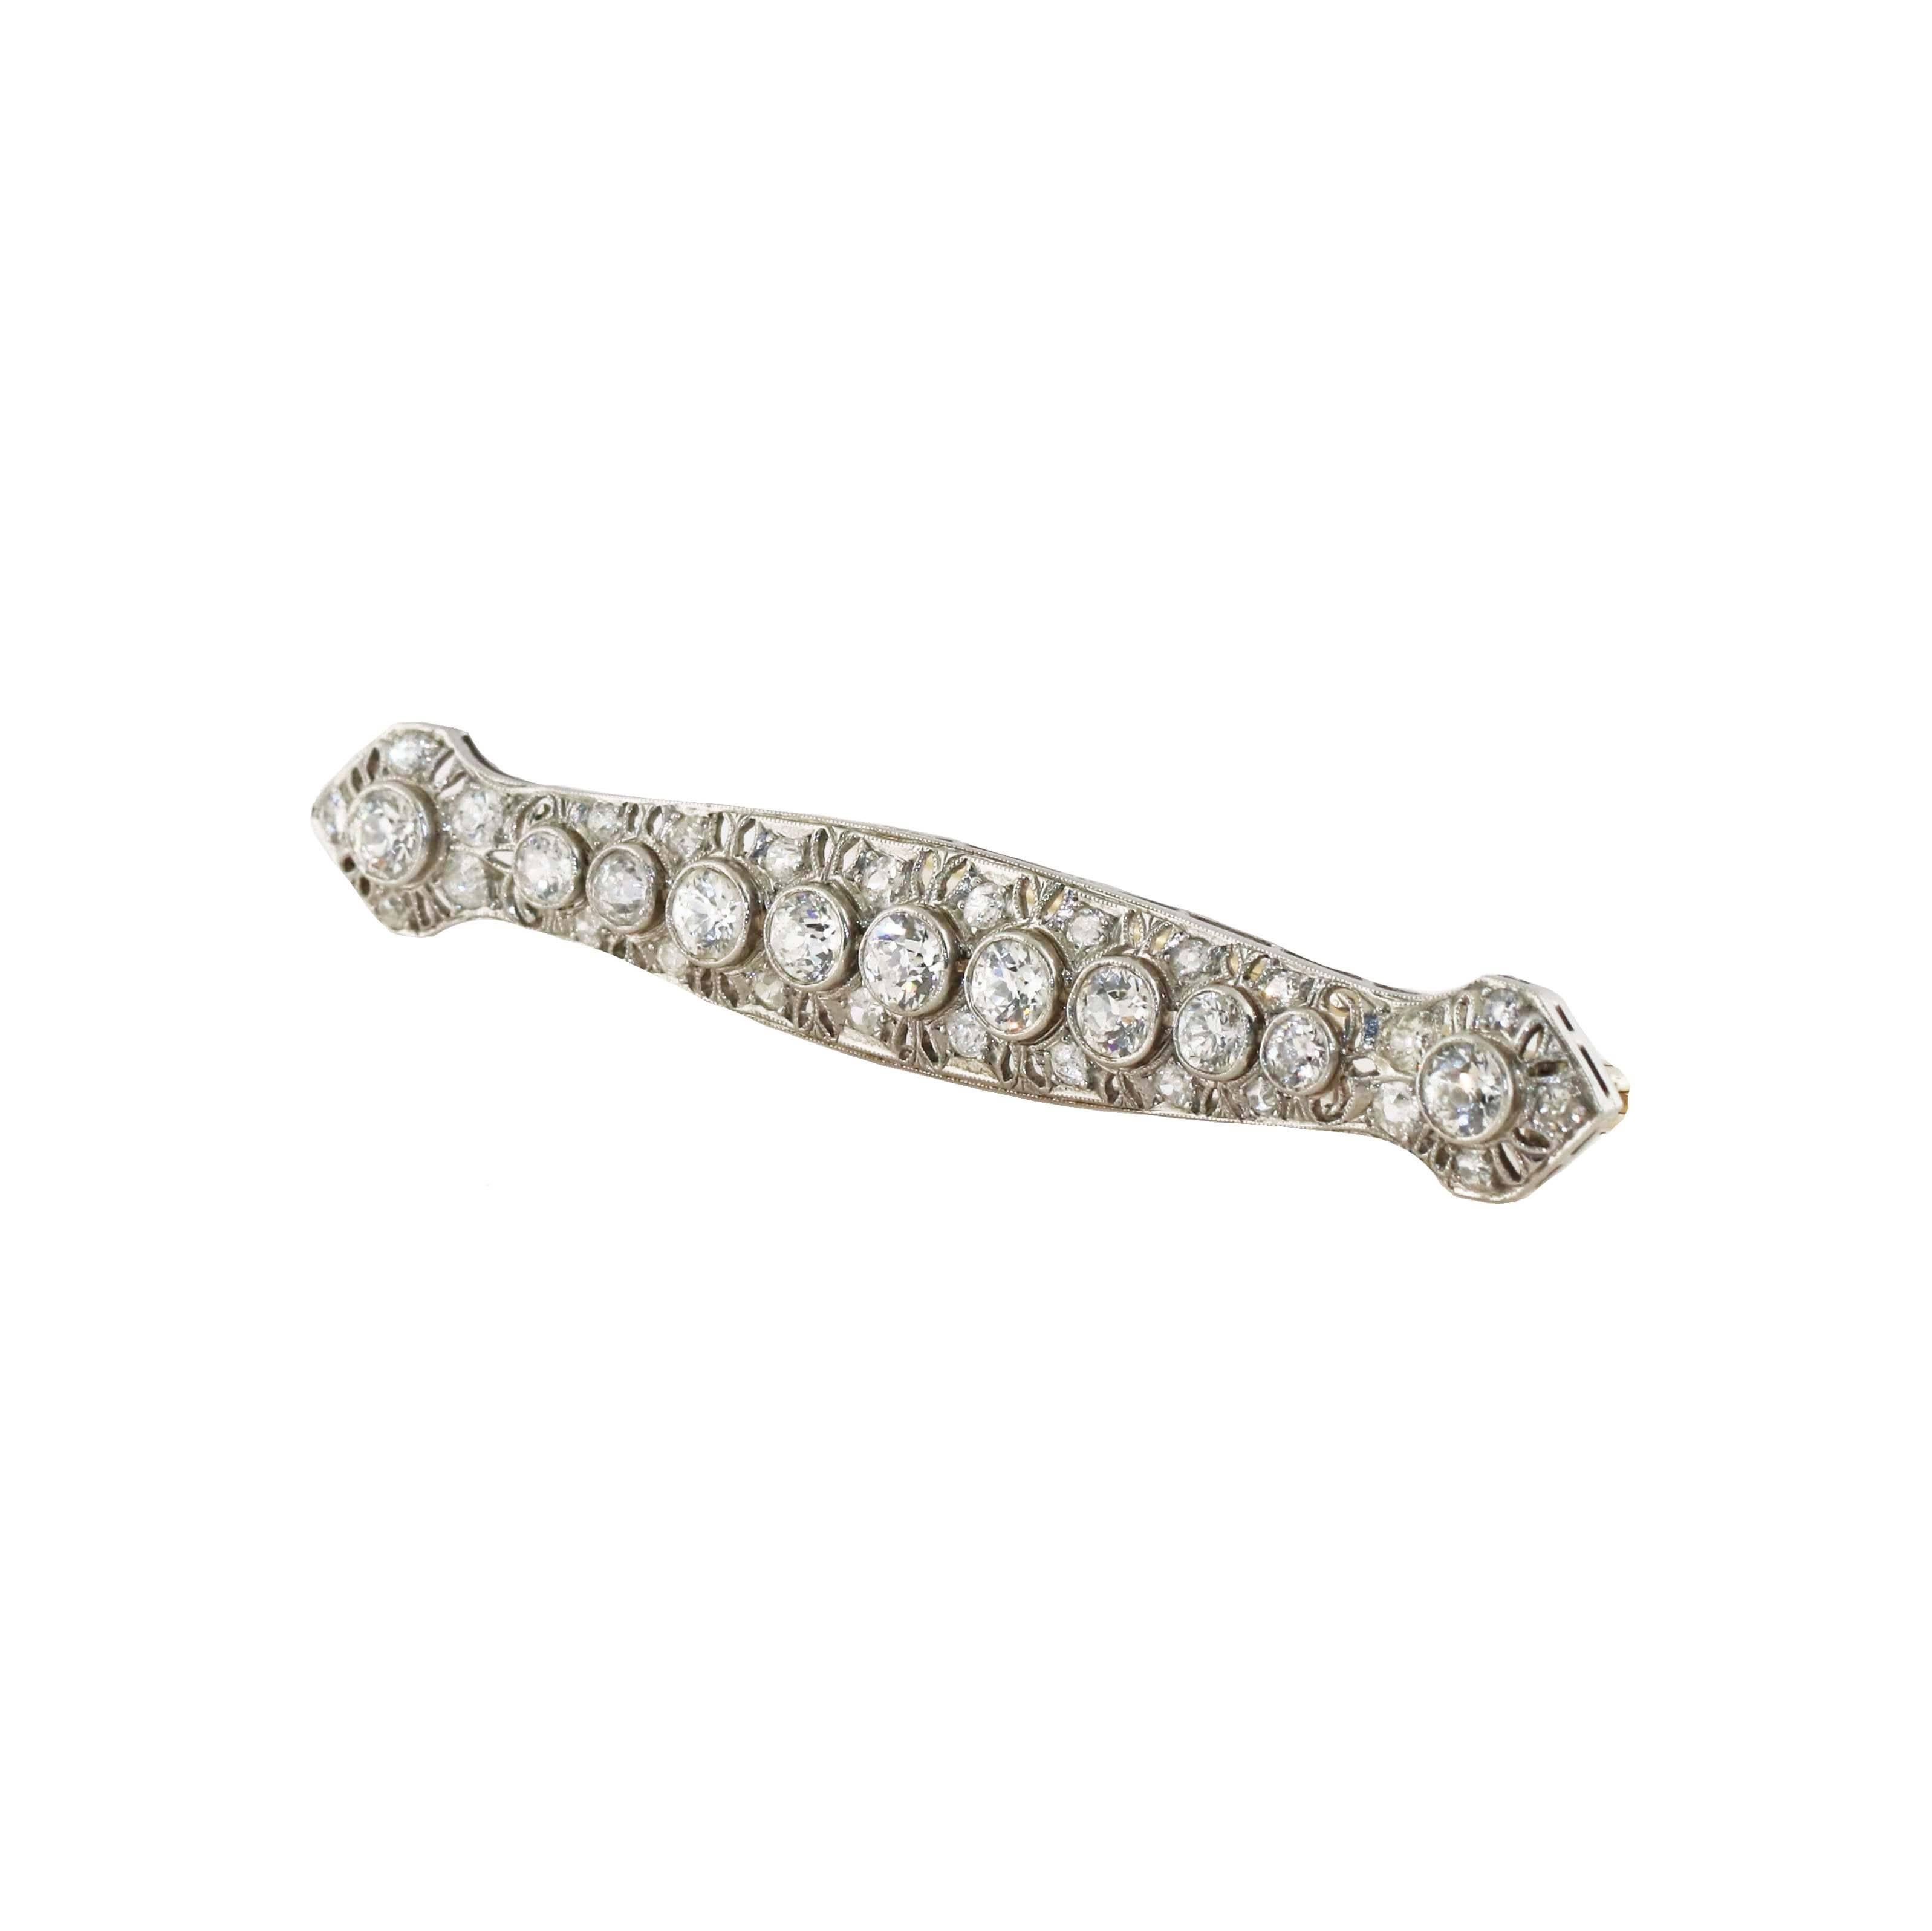 Looking to make a statement? This antique diamond brooch pin is a sure win! Over 3 carats of old European cut diamonds set in platinum. Outside the larger 3 carats of Old European diamonds, you have over 1/4 carat of smaller Old European diamonds